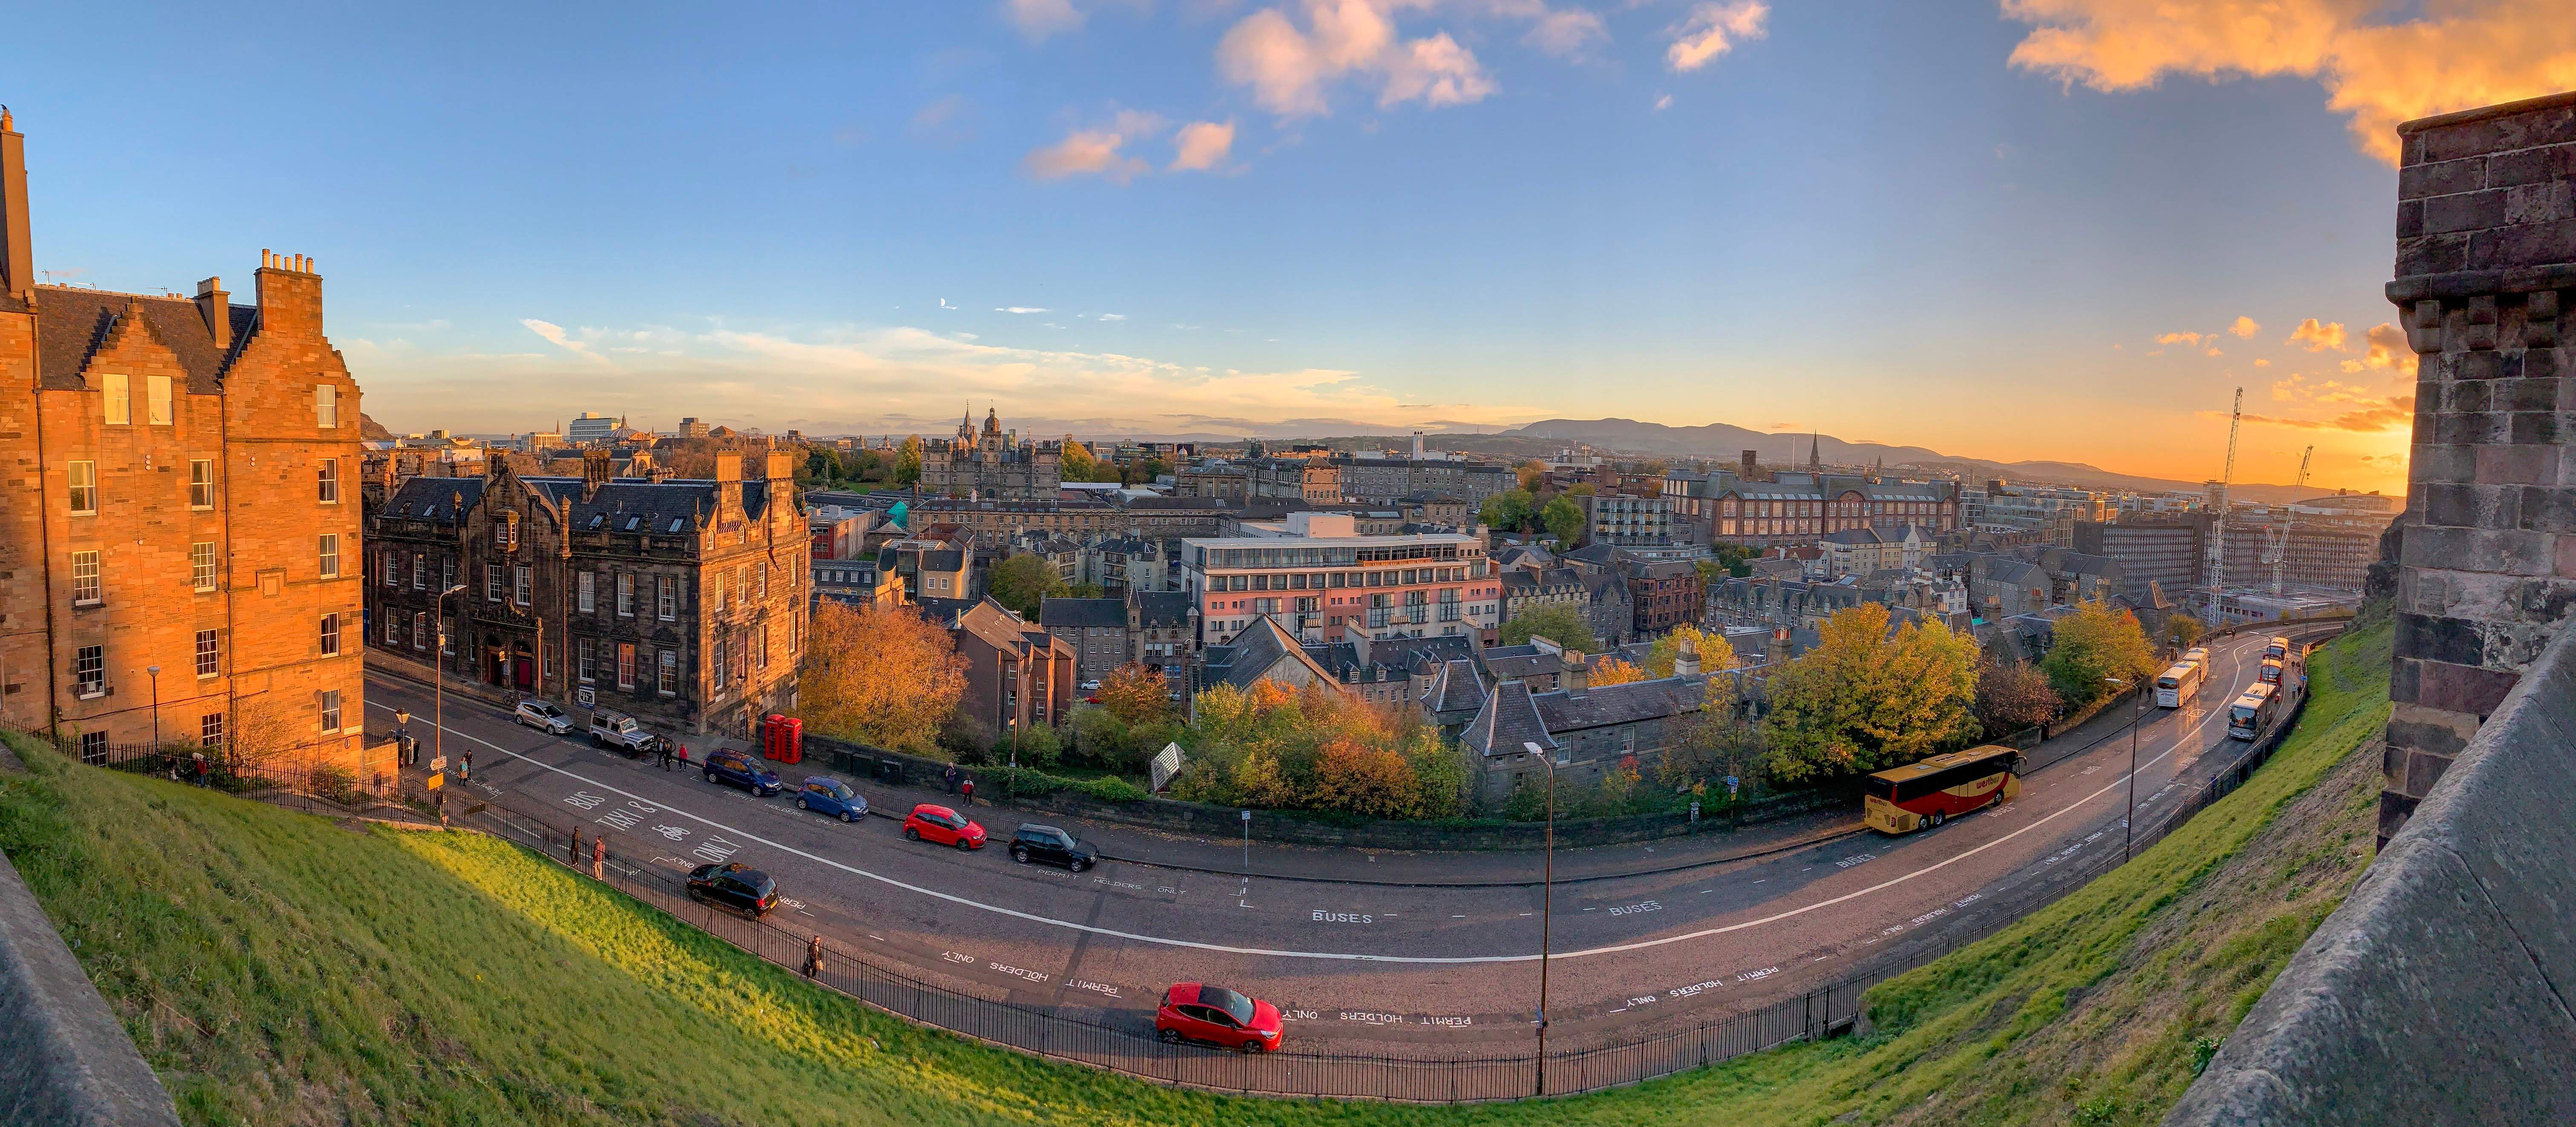 Panoramic view over Edinburgh from Castle Rock